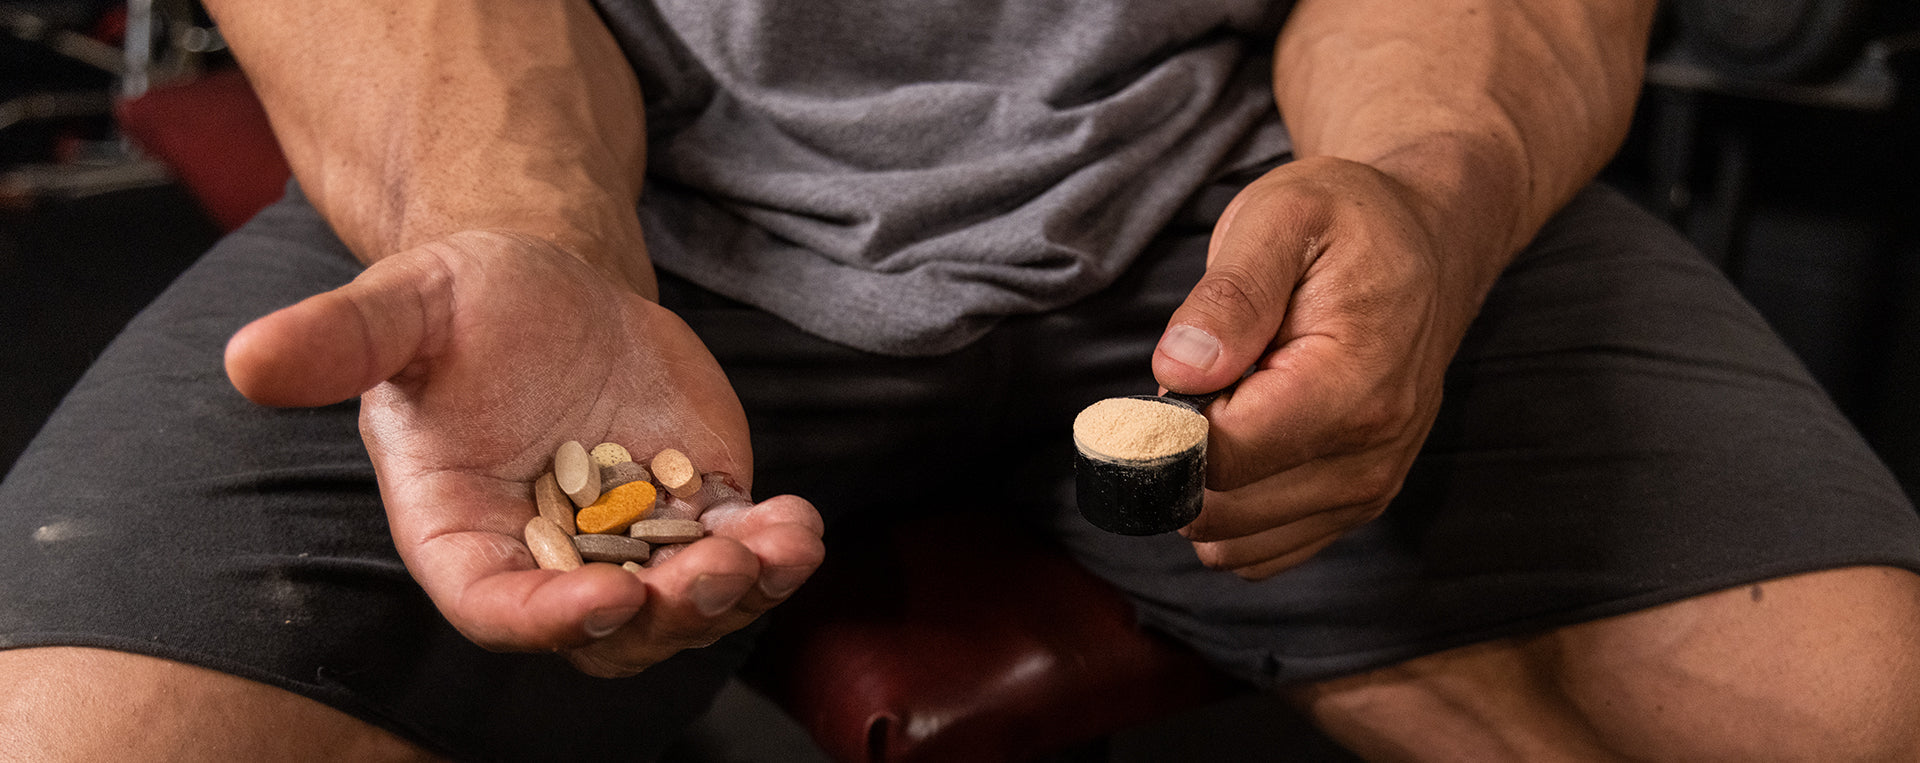 IFBB Pro John Jewett shares his guide on pills vs powders, specifically when it comes to travel.